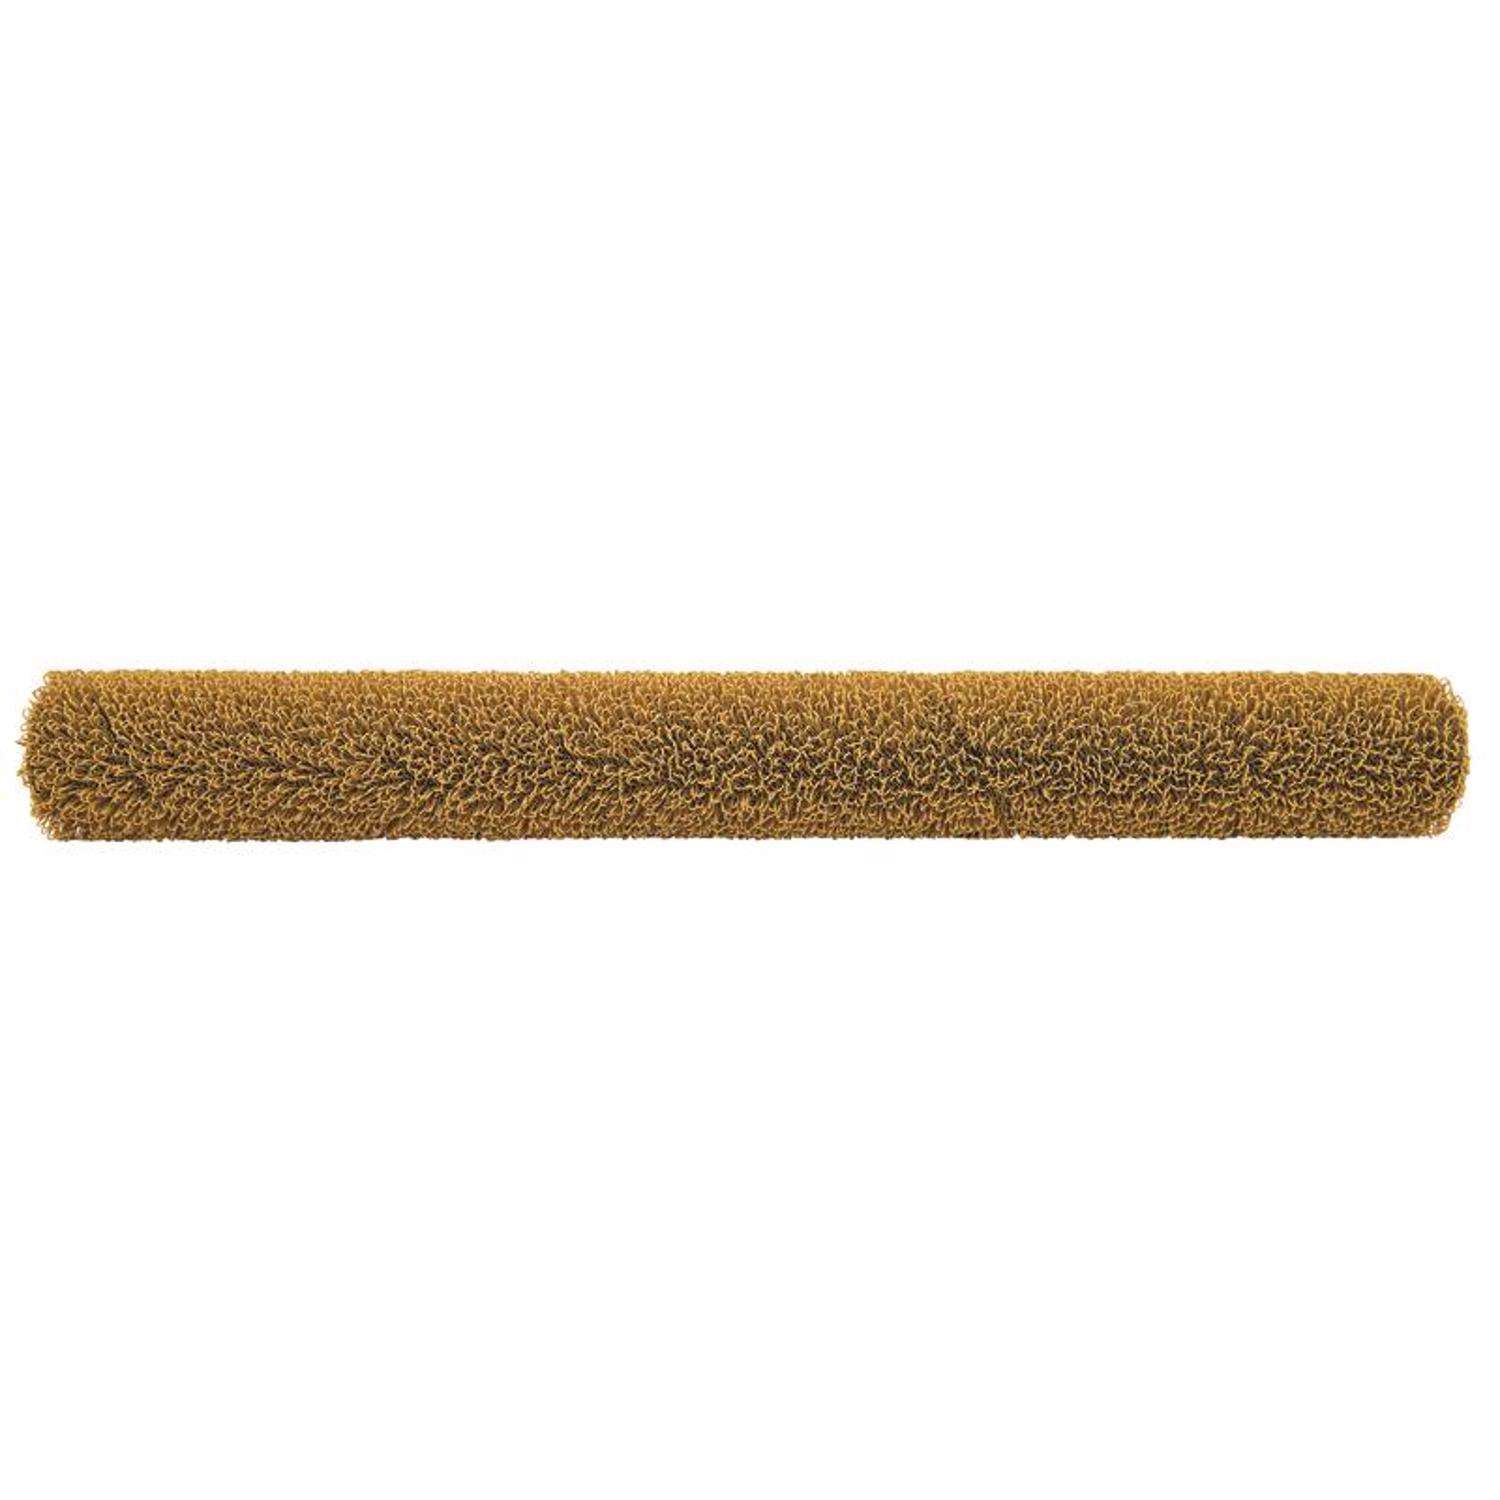 Wooster Brush, 9-Inch R233-9 Texture Maker Roller Cover, Tan - Paint Rollers  